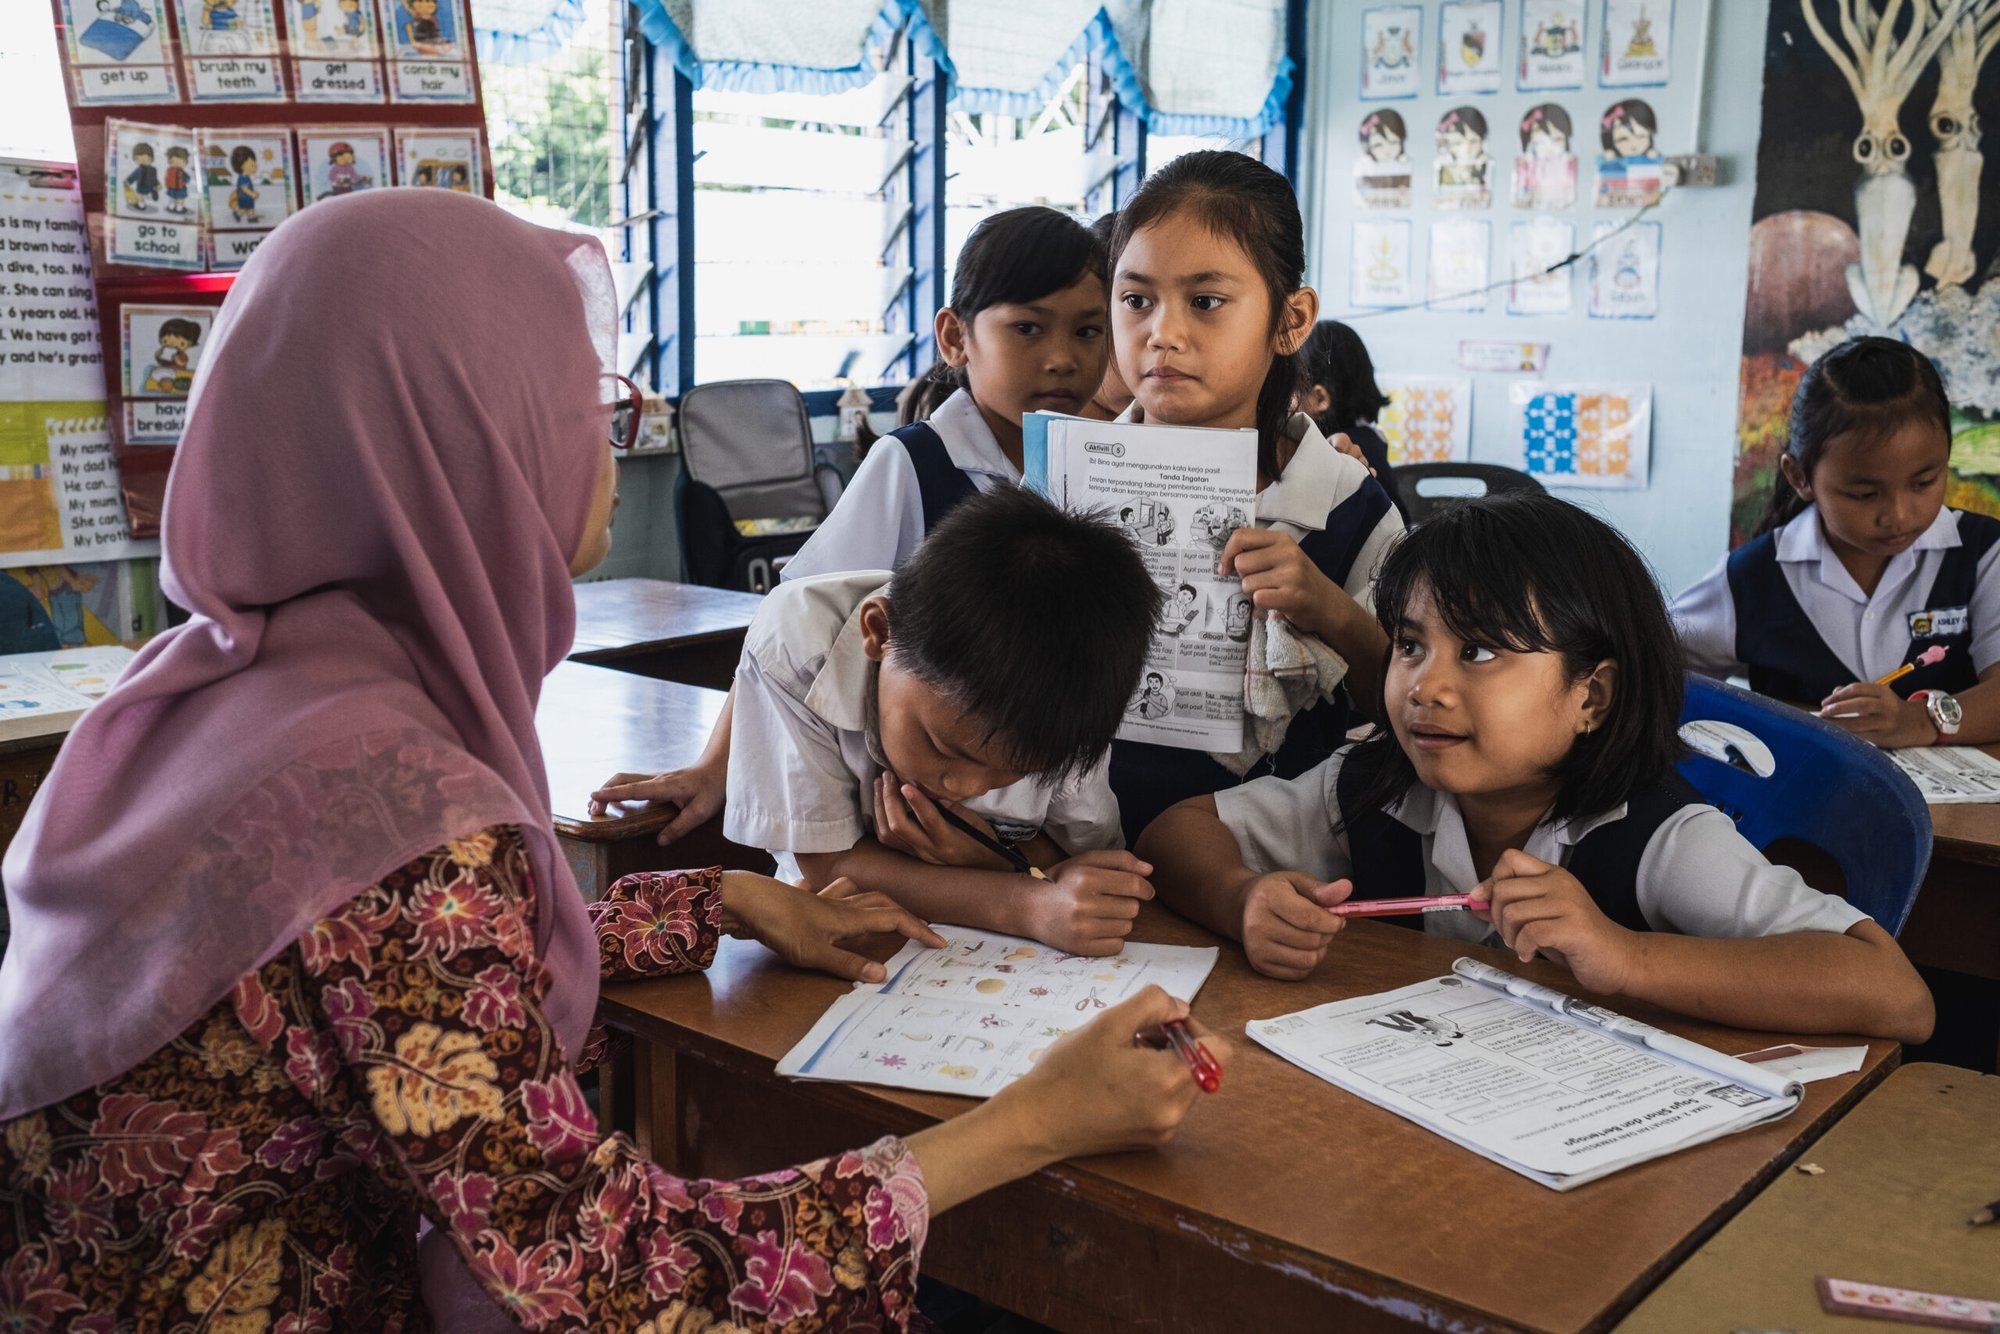 Penan children in a school room, lining up in front of their teacher.